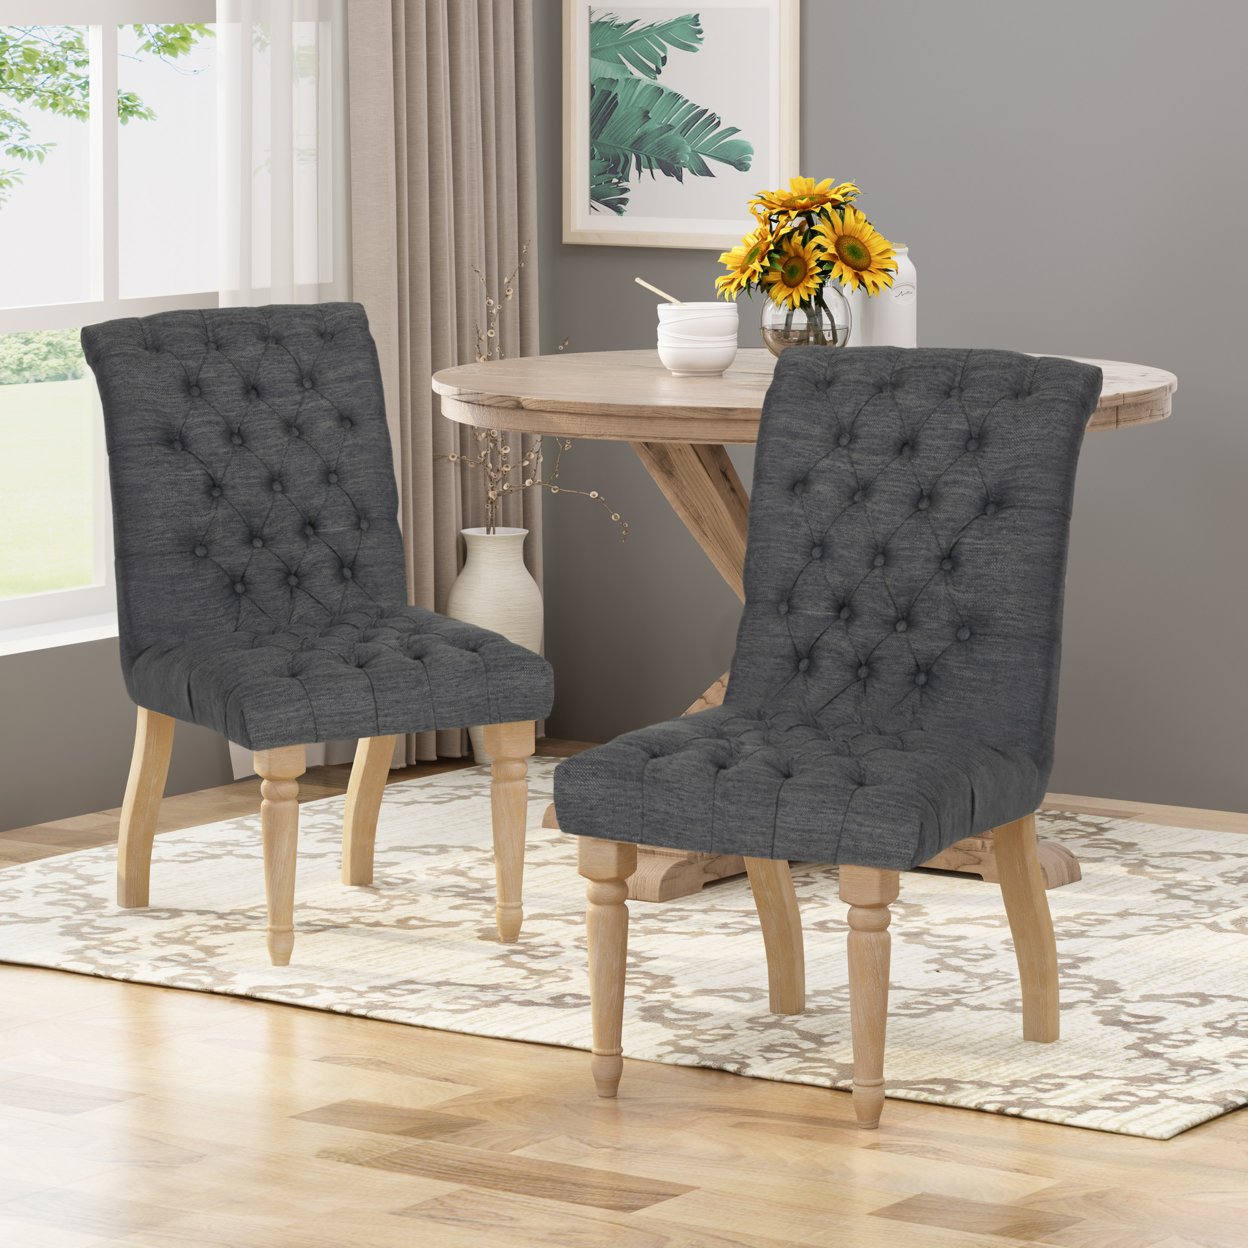 Terrance Tufted Fabric Dining Chair (Set Of 2) - Beige + Natural